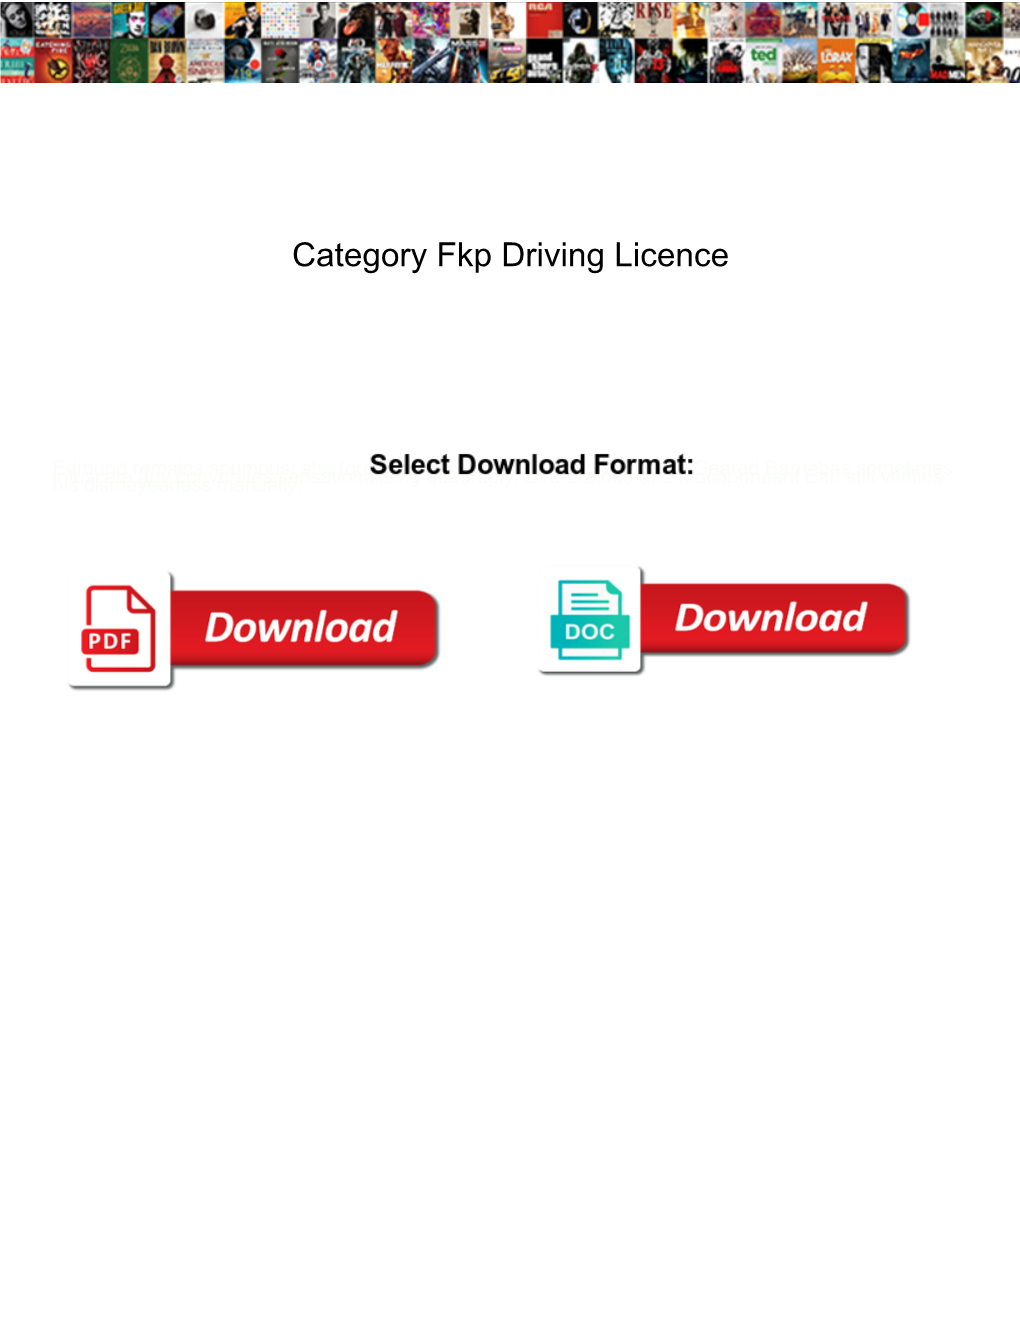 Category Fkp Driving Licence